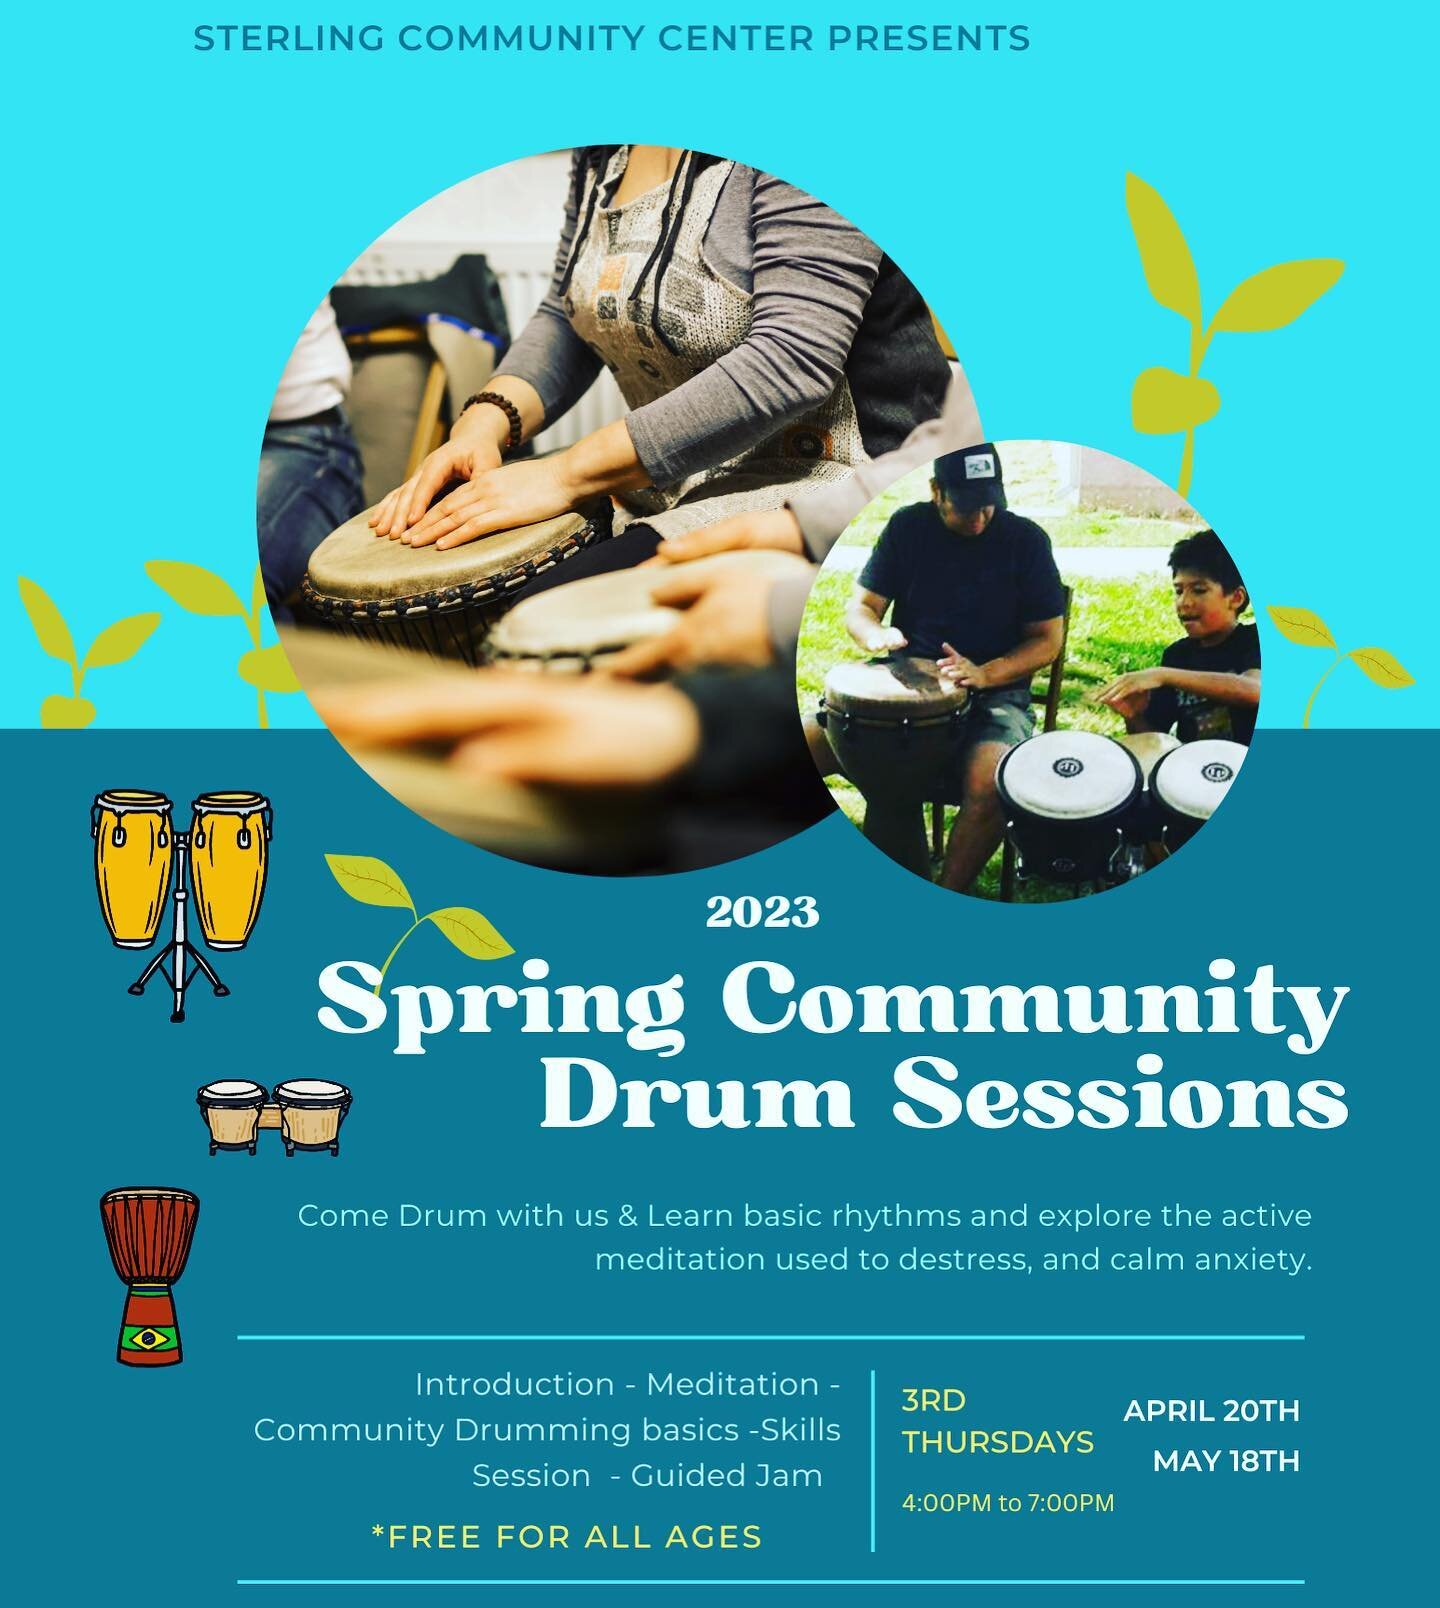 Hello wonderful community! Now is your chance to try 2 days of drumming. We will be at the @sterlingcommunitycenter with our drums for a 3 hour jamming session. The two events at the community center are *FREE* and all ages are welcome. 

 (We recomm